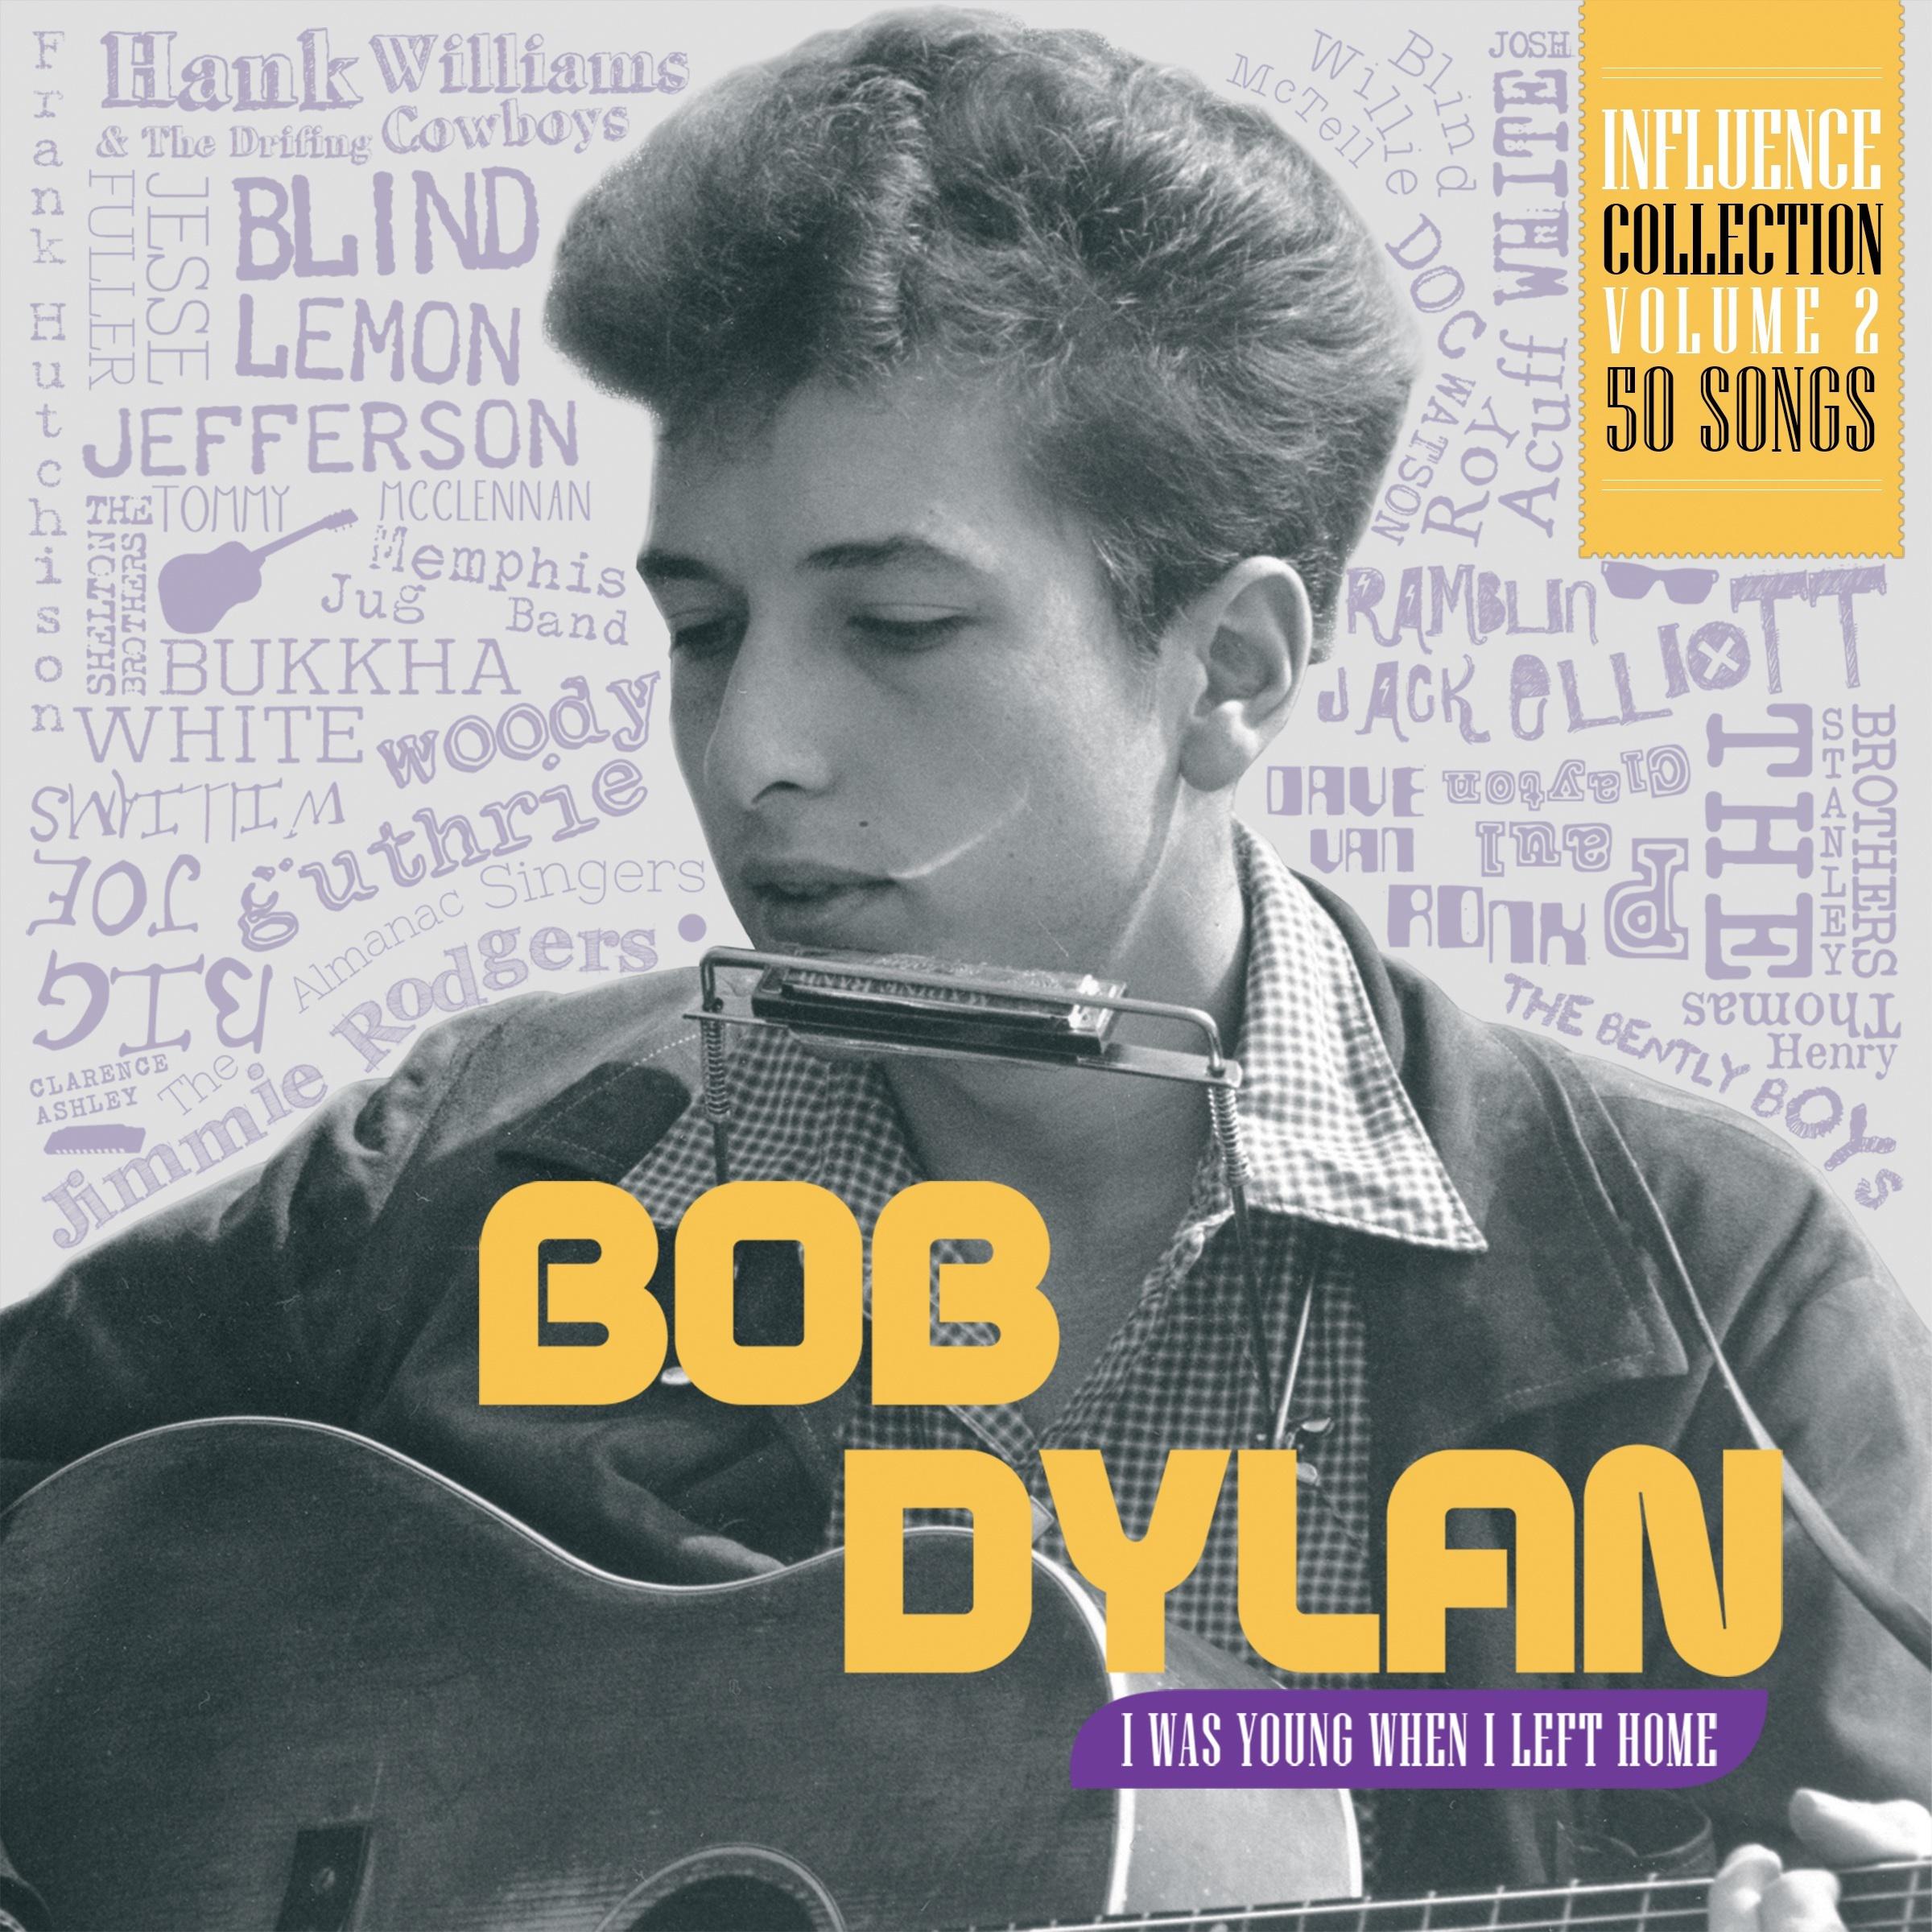 Influence Vol. 2: Bob Dylan, I Was Young When I Left Home